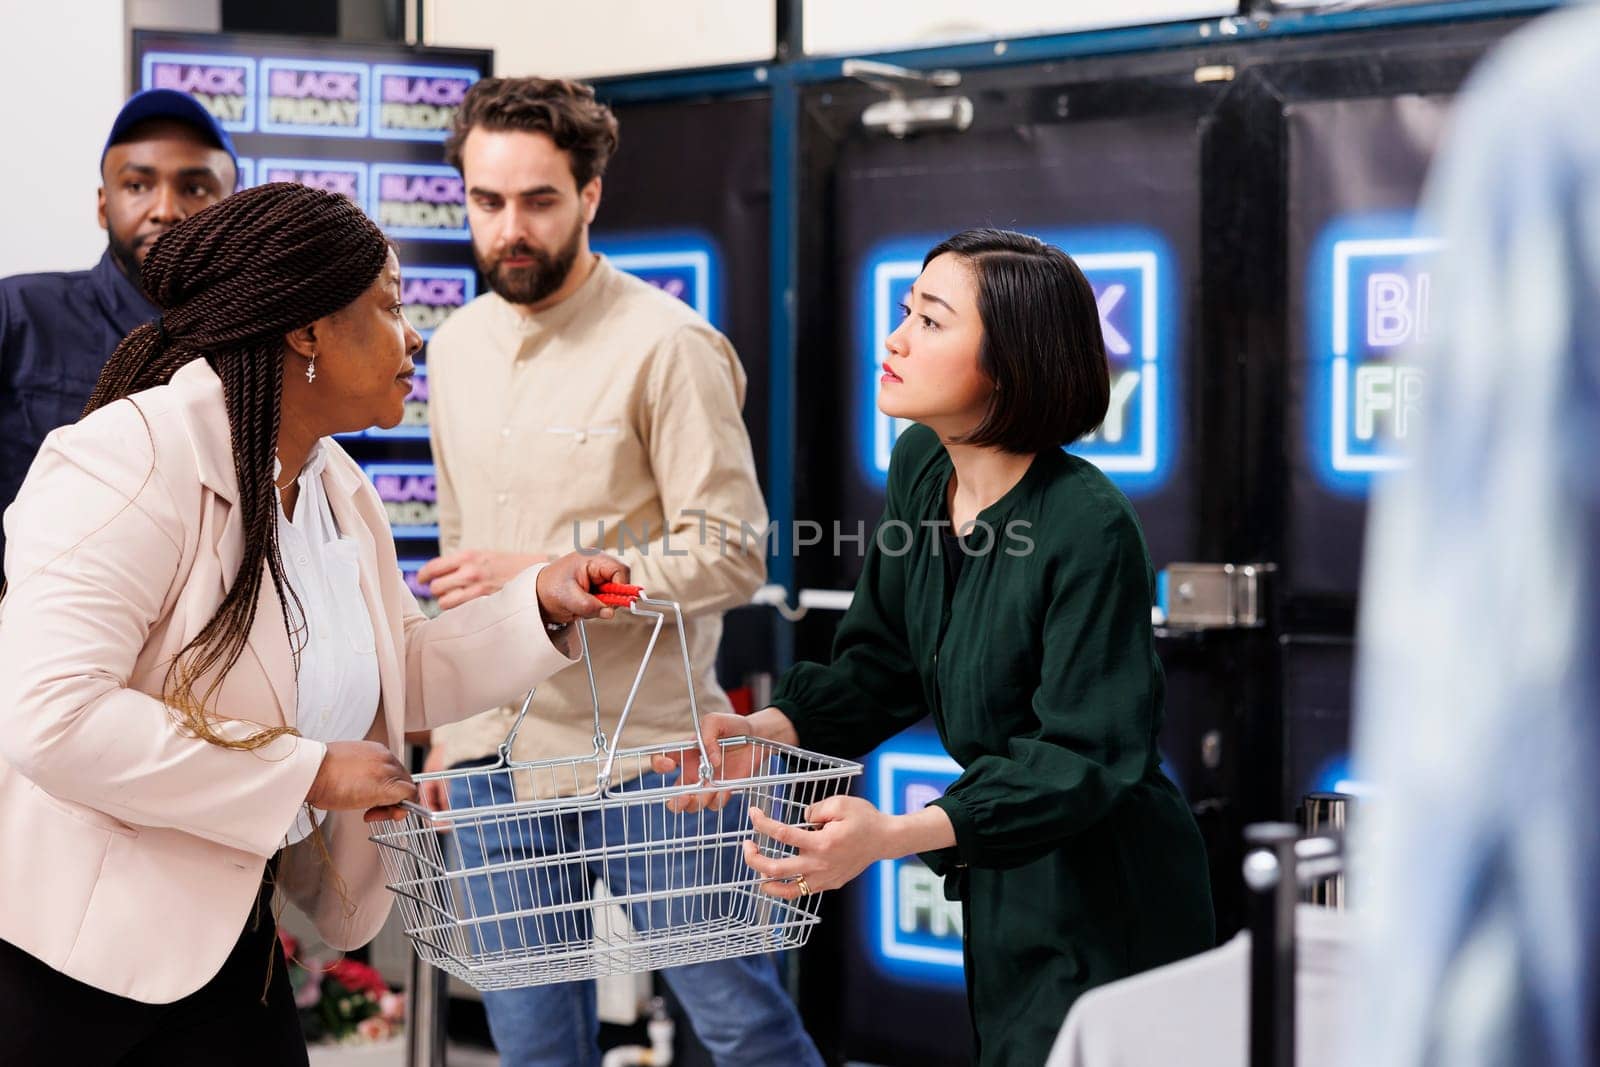 Black Friday madness. Stressed people shoppers pulling shopping basket while hunting for bargains, arguing during seasonal sales, two angry women fighting in store, bargain hunting